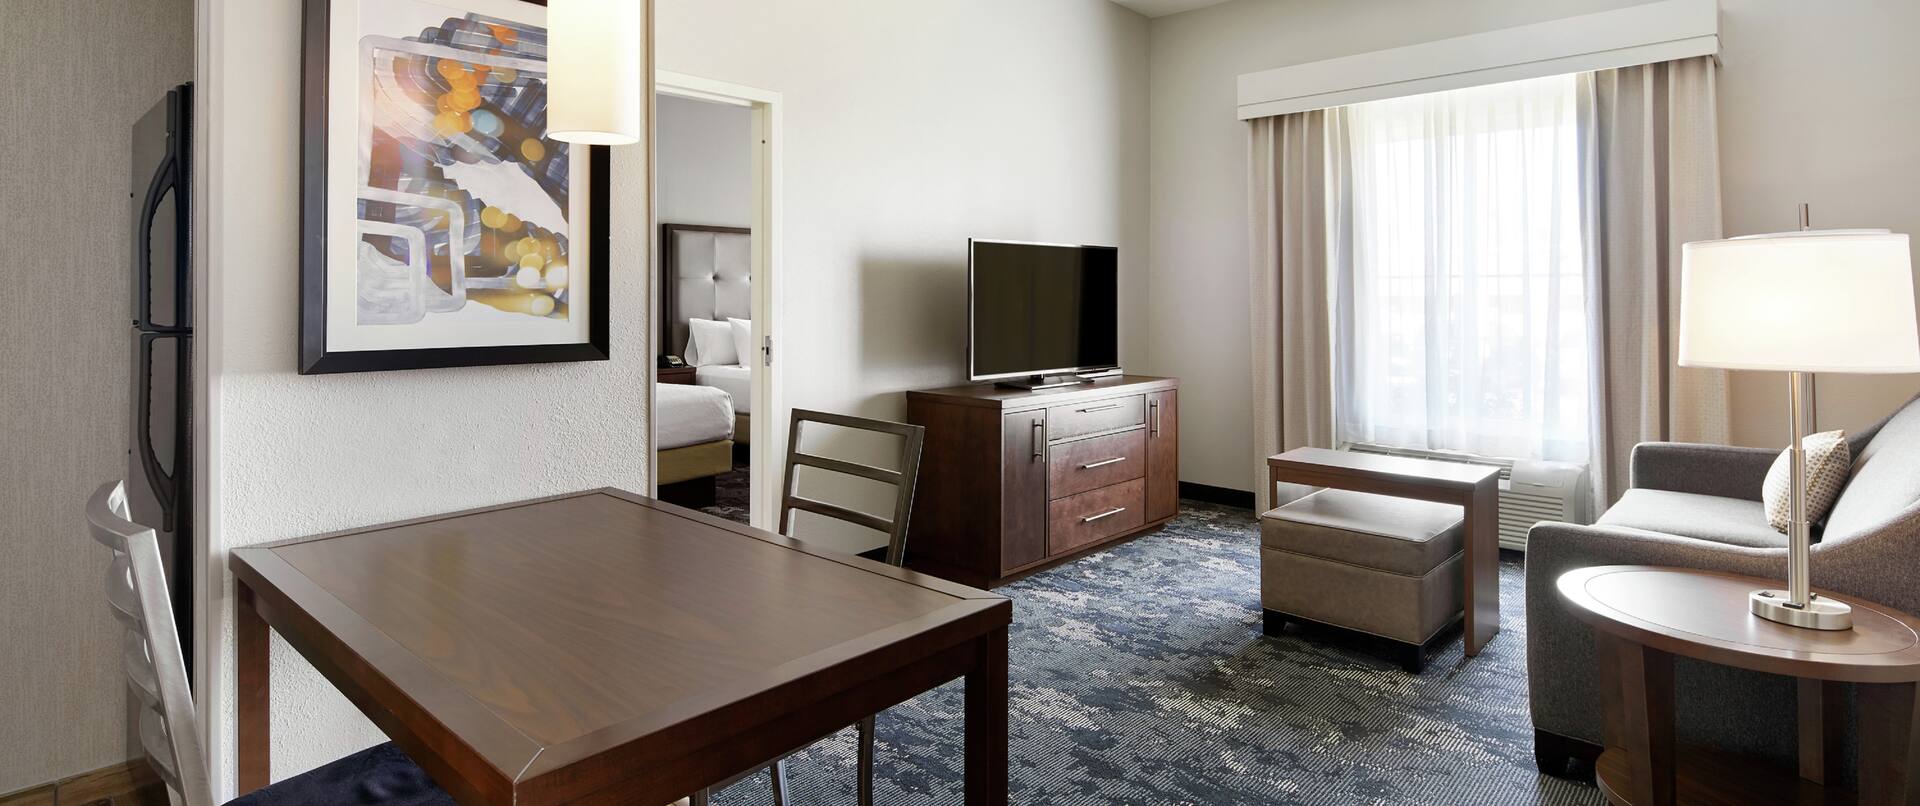 Suite living area with comfortable seating